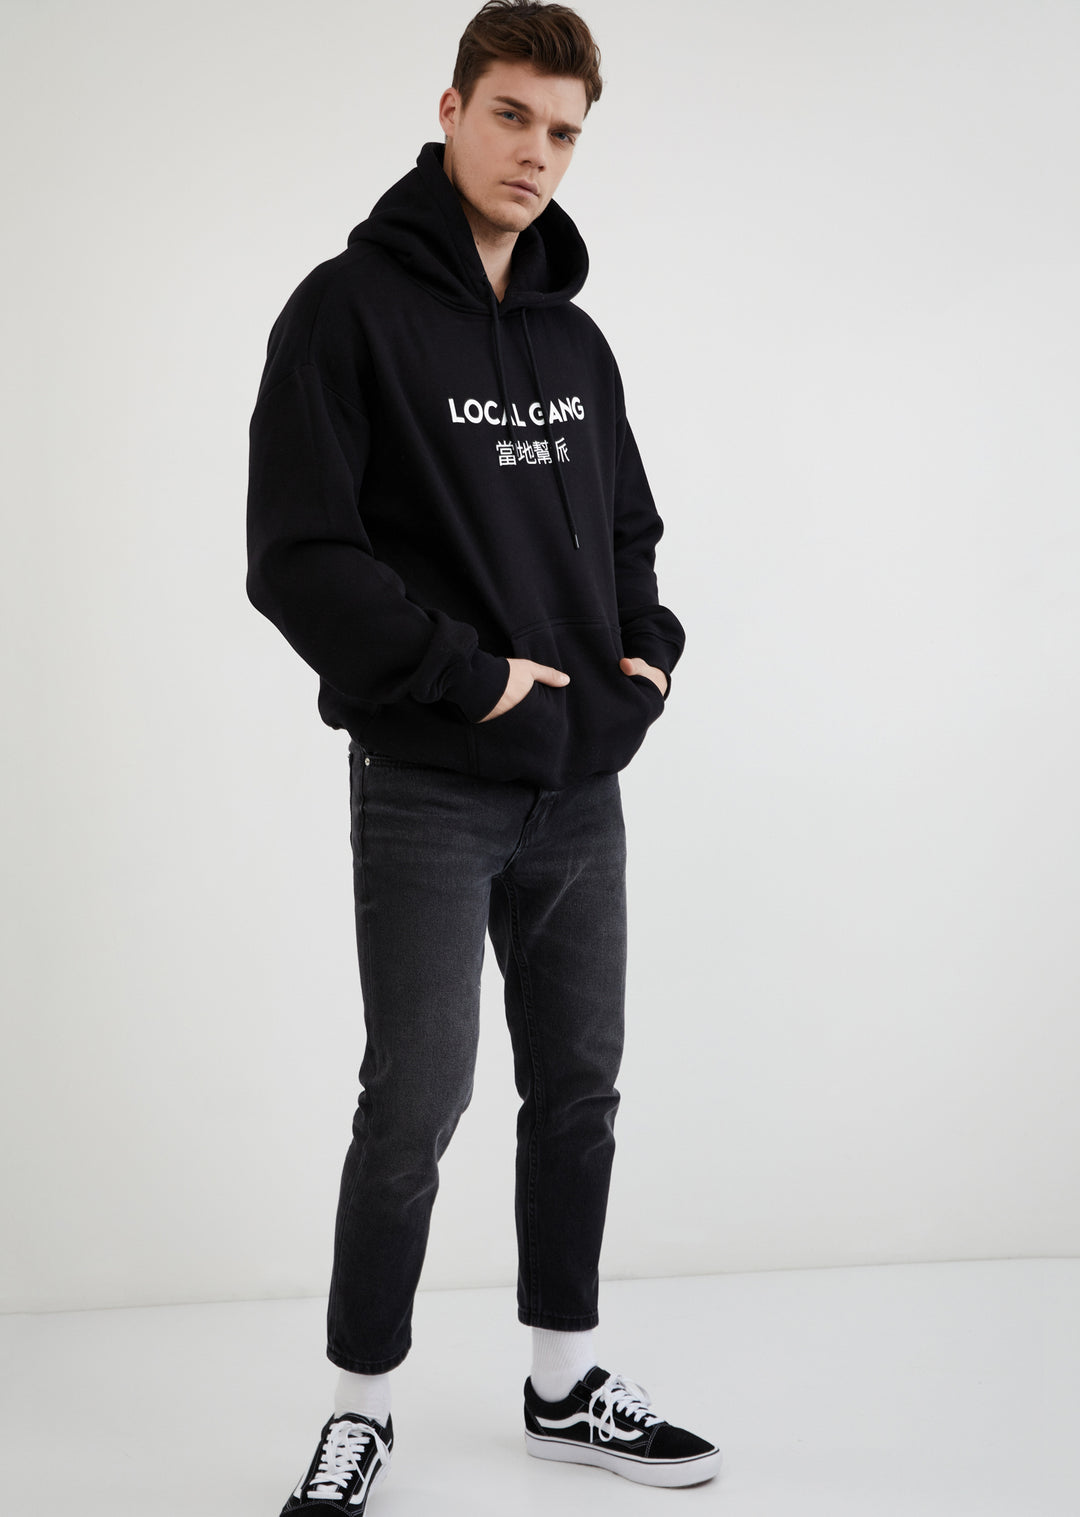 Local Gang / Oversized Pullover Hoodie